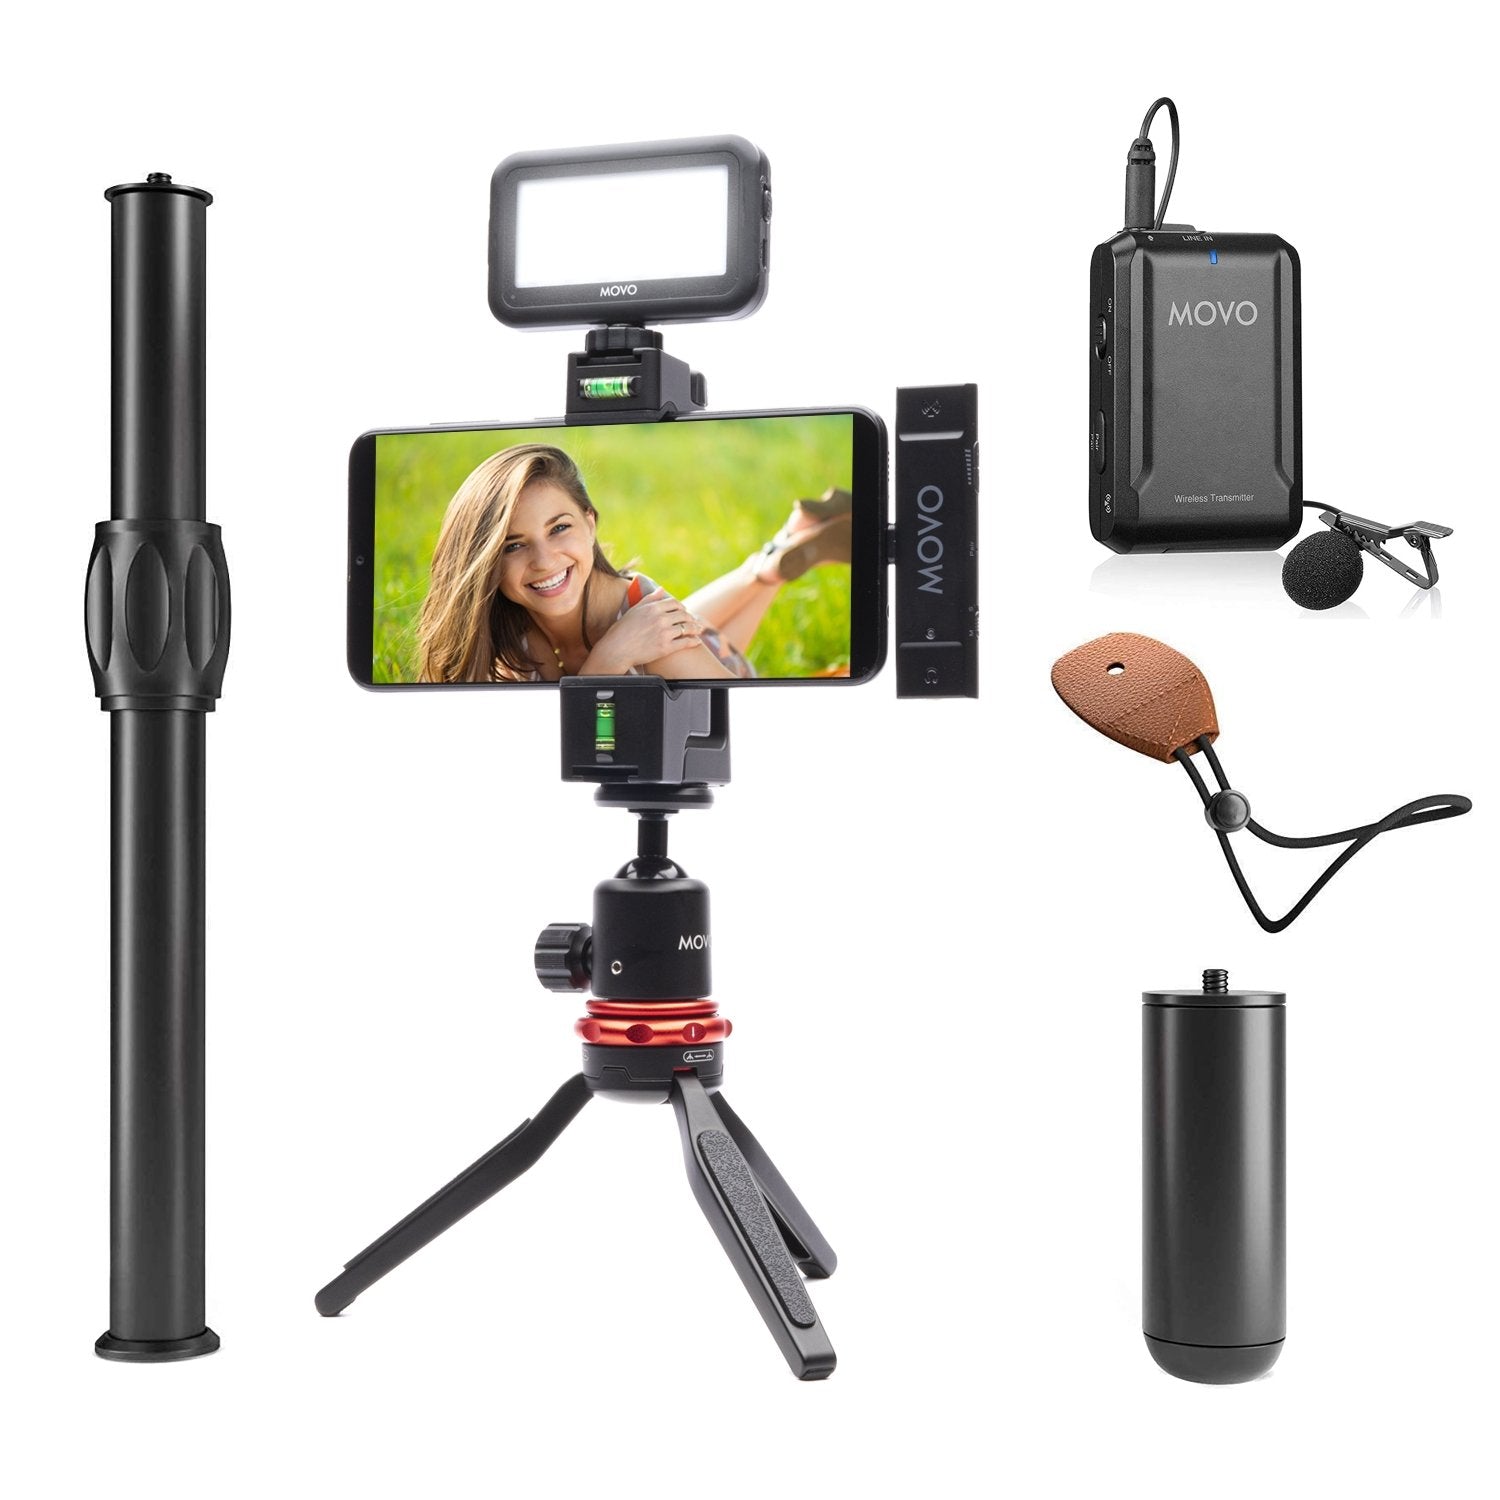 Movo Smartphone Vlogging Kit for iPhone with Shotgun Microphone, Grip  Handle, Wrist Strap for iPhone and Android Smartphones for TIK Tok, Vlog